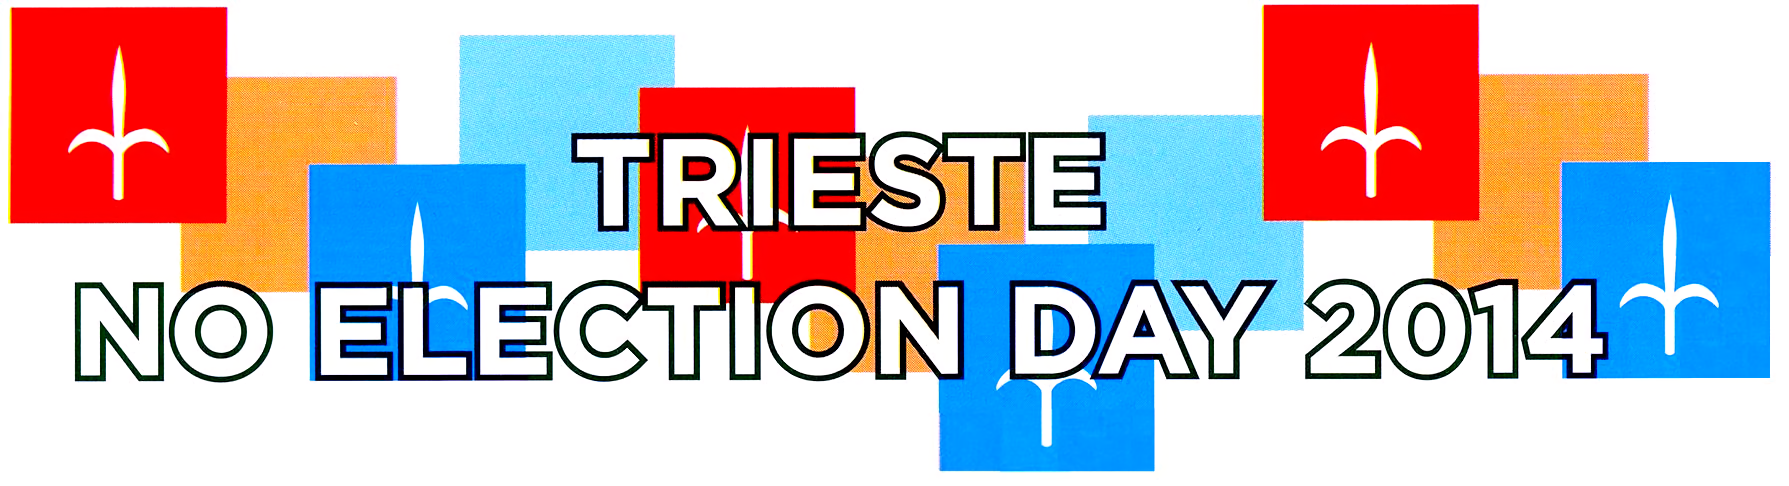 Trieste No Election Day 2014